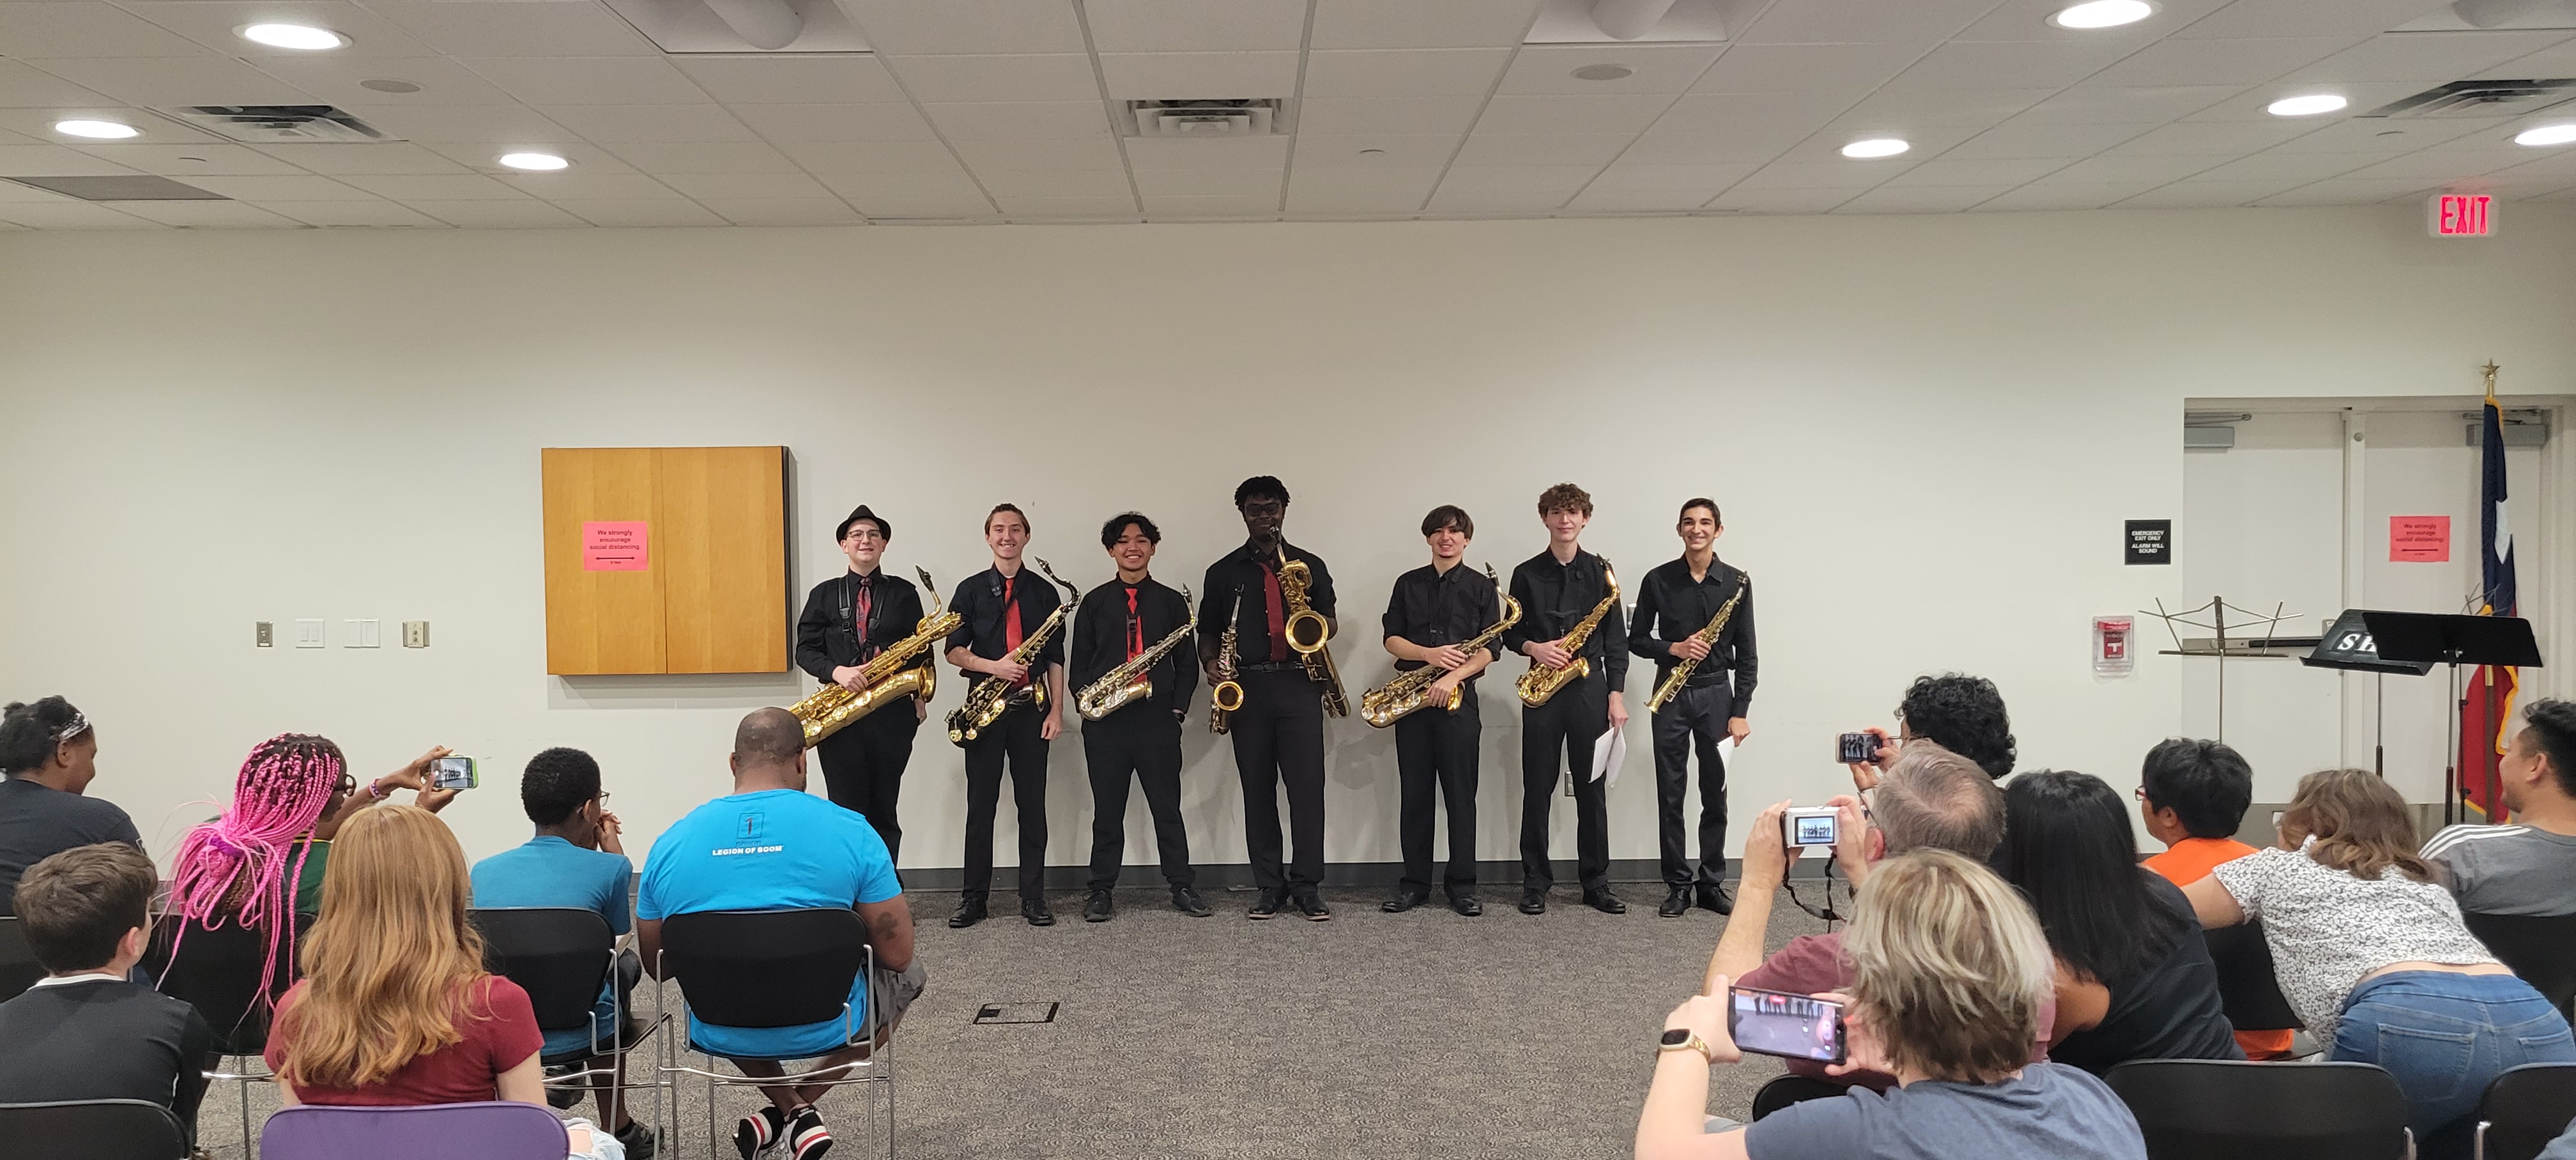 A saxophone quartet performing in the Meeting Room at Sienna Branch Library